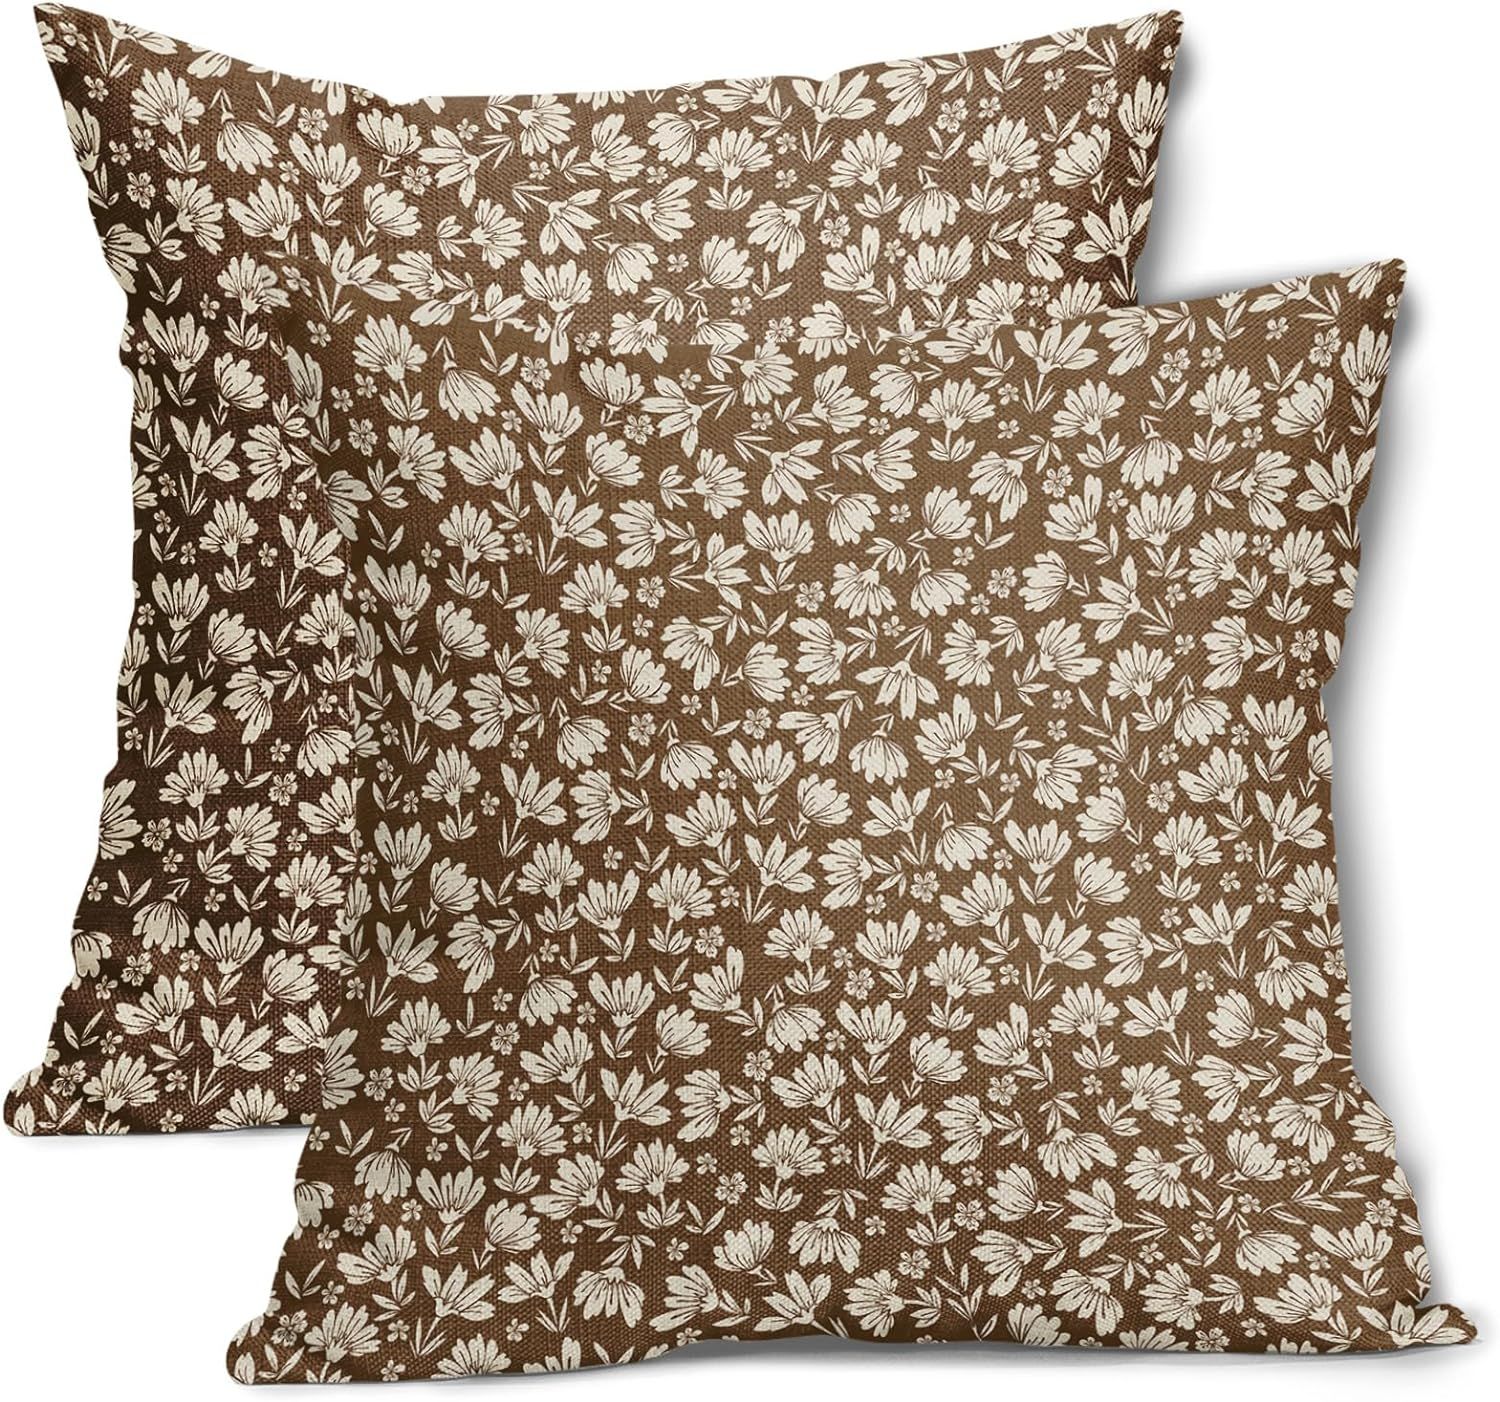 Brown Beige Daisy Floral Pillow Covers 18X18 Inch Vintage Flowers Decorative Pillow Cases Set of ... | Amazon (US)